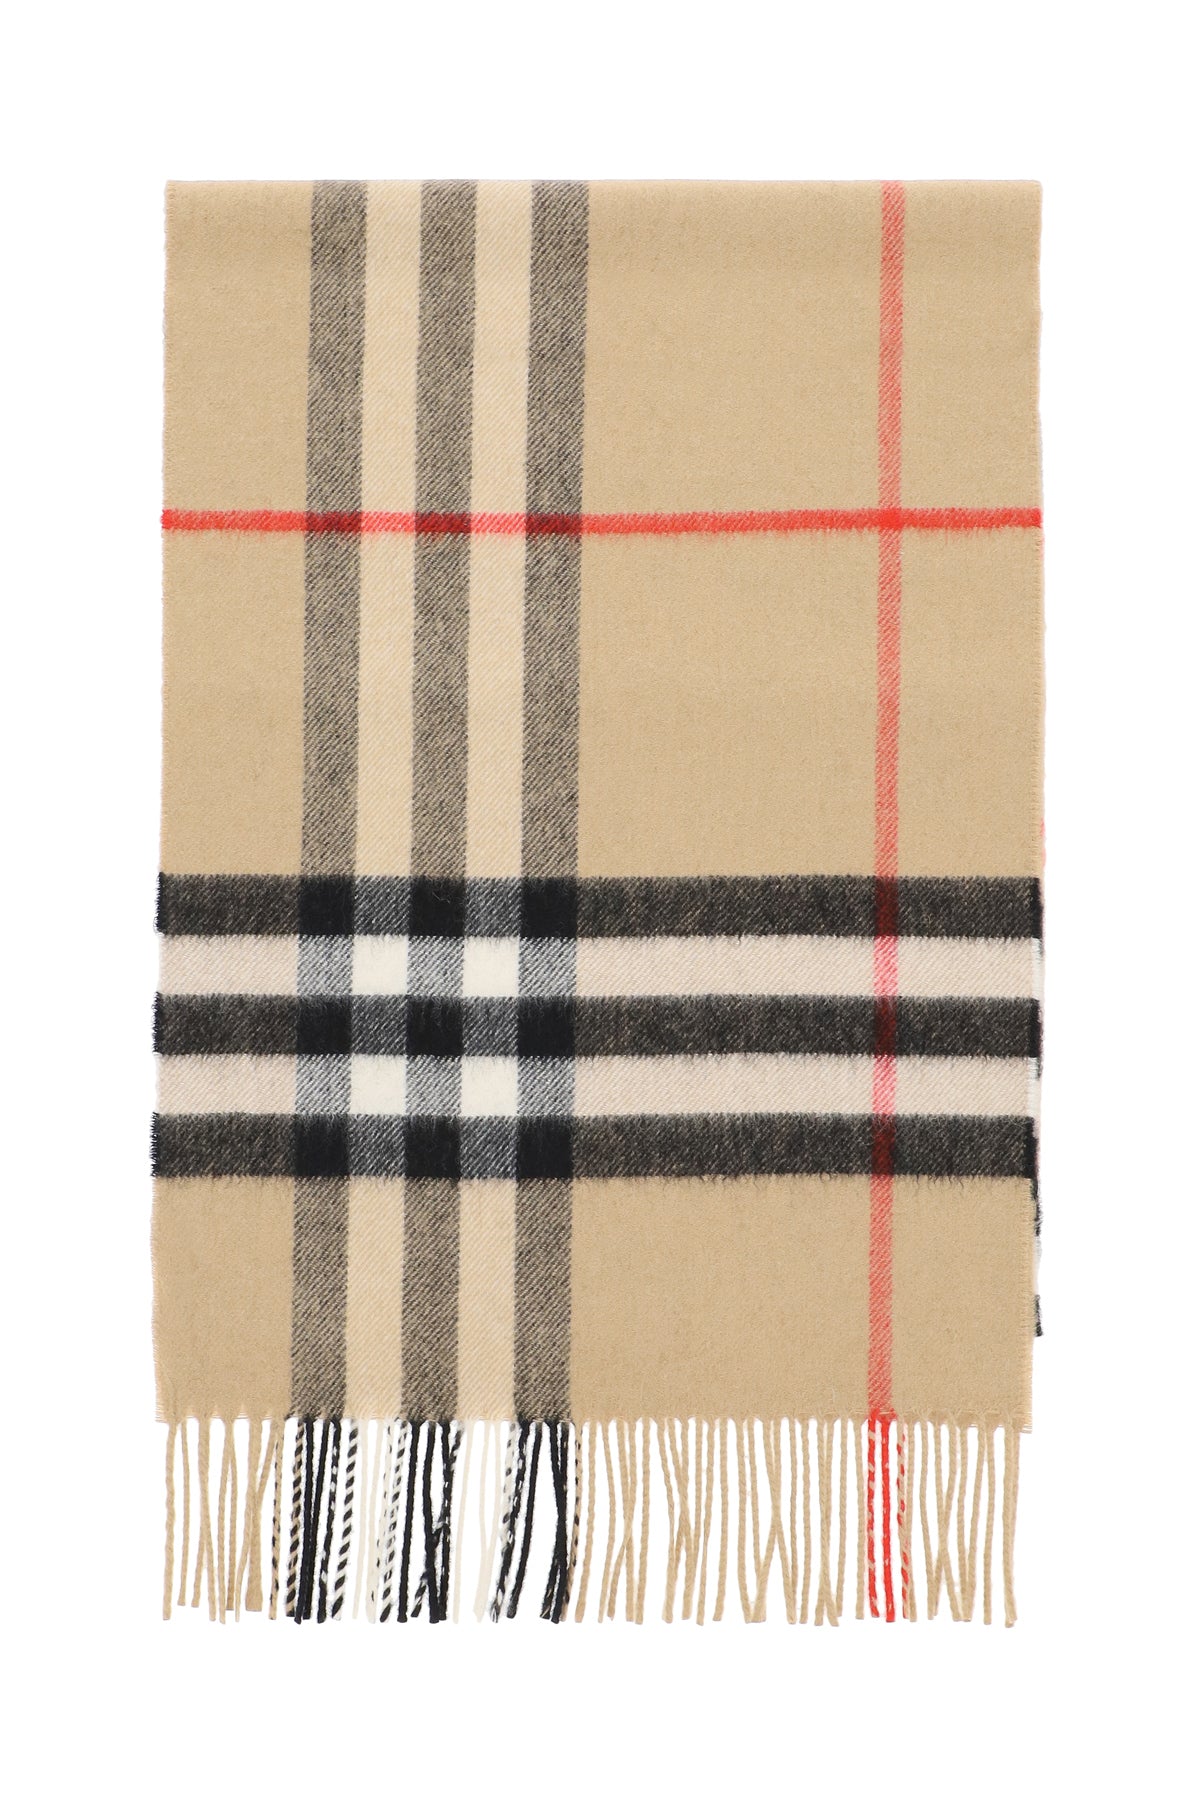 BURBERRY CASHMERE GIANT CHECK SCARF